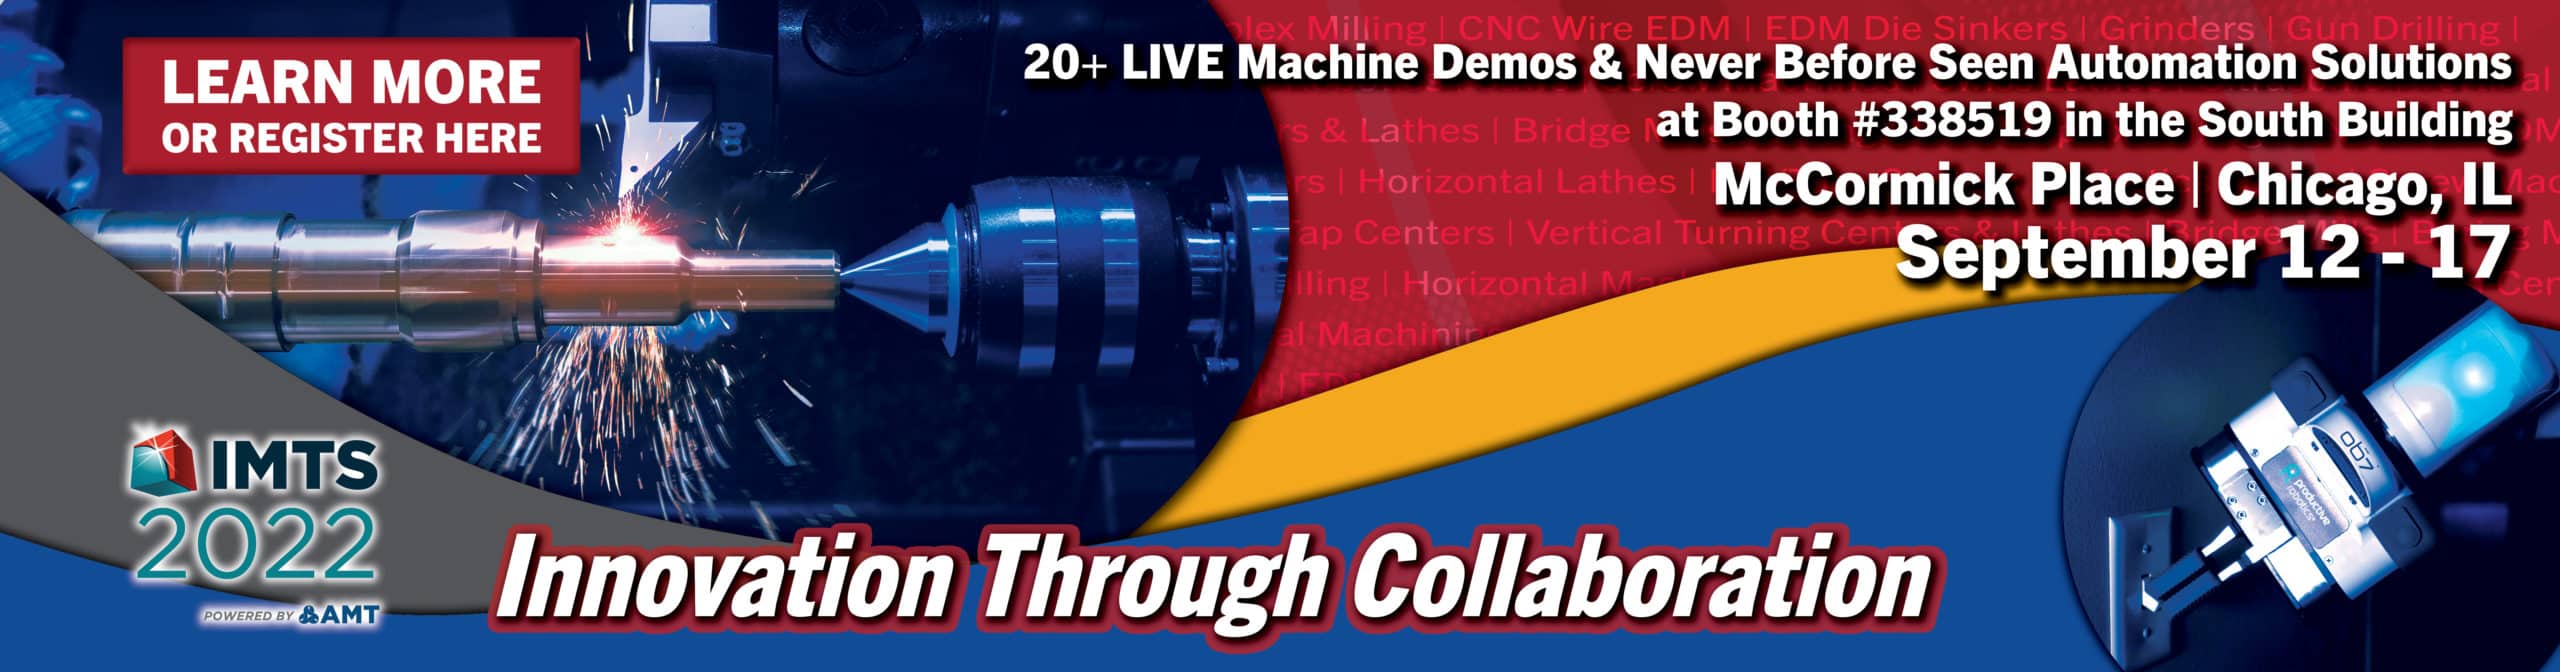 IMTS 2022 Absolute Machine Tools